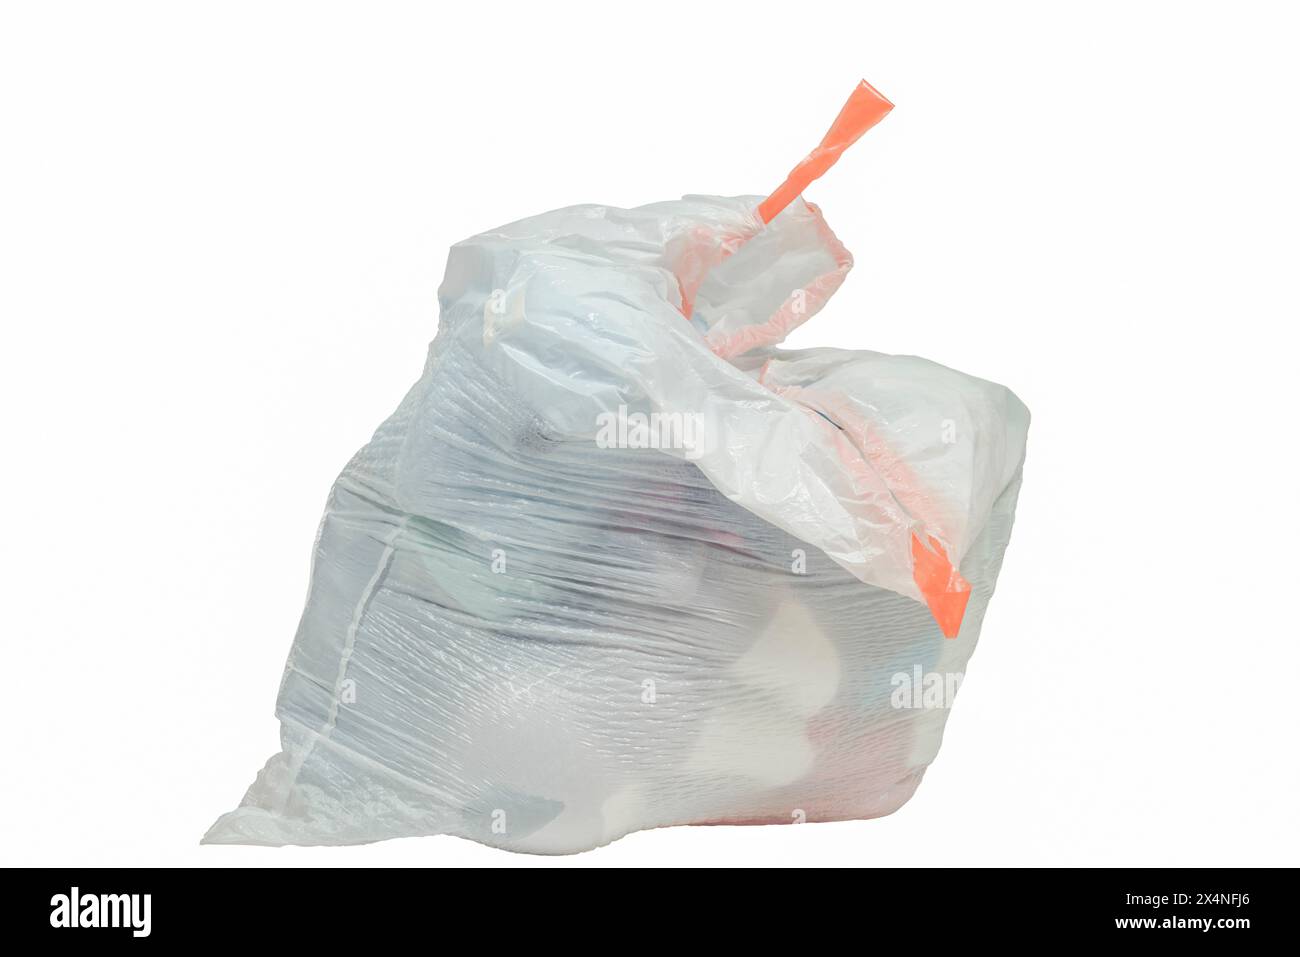 Horizontal close-up shot of a full white trash bag with an orange tie isolated on white. Stock Photo